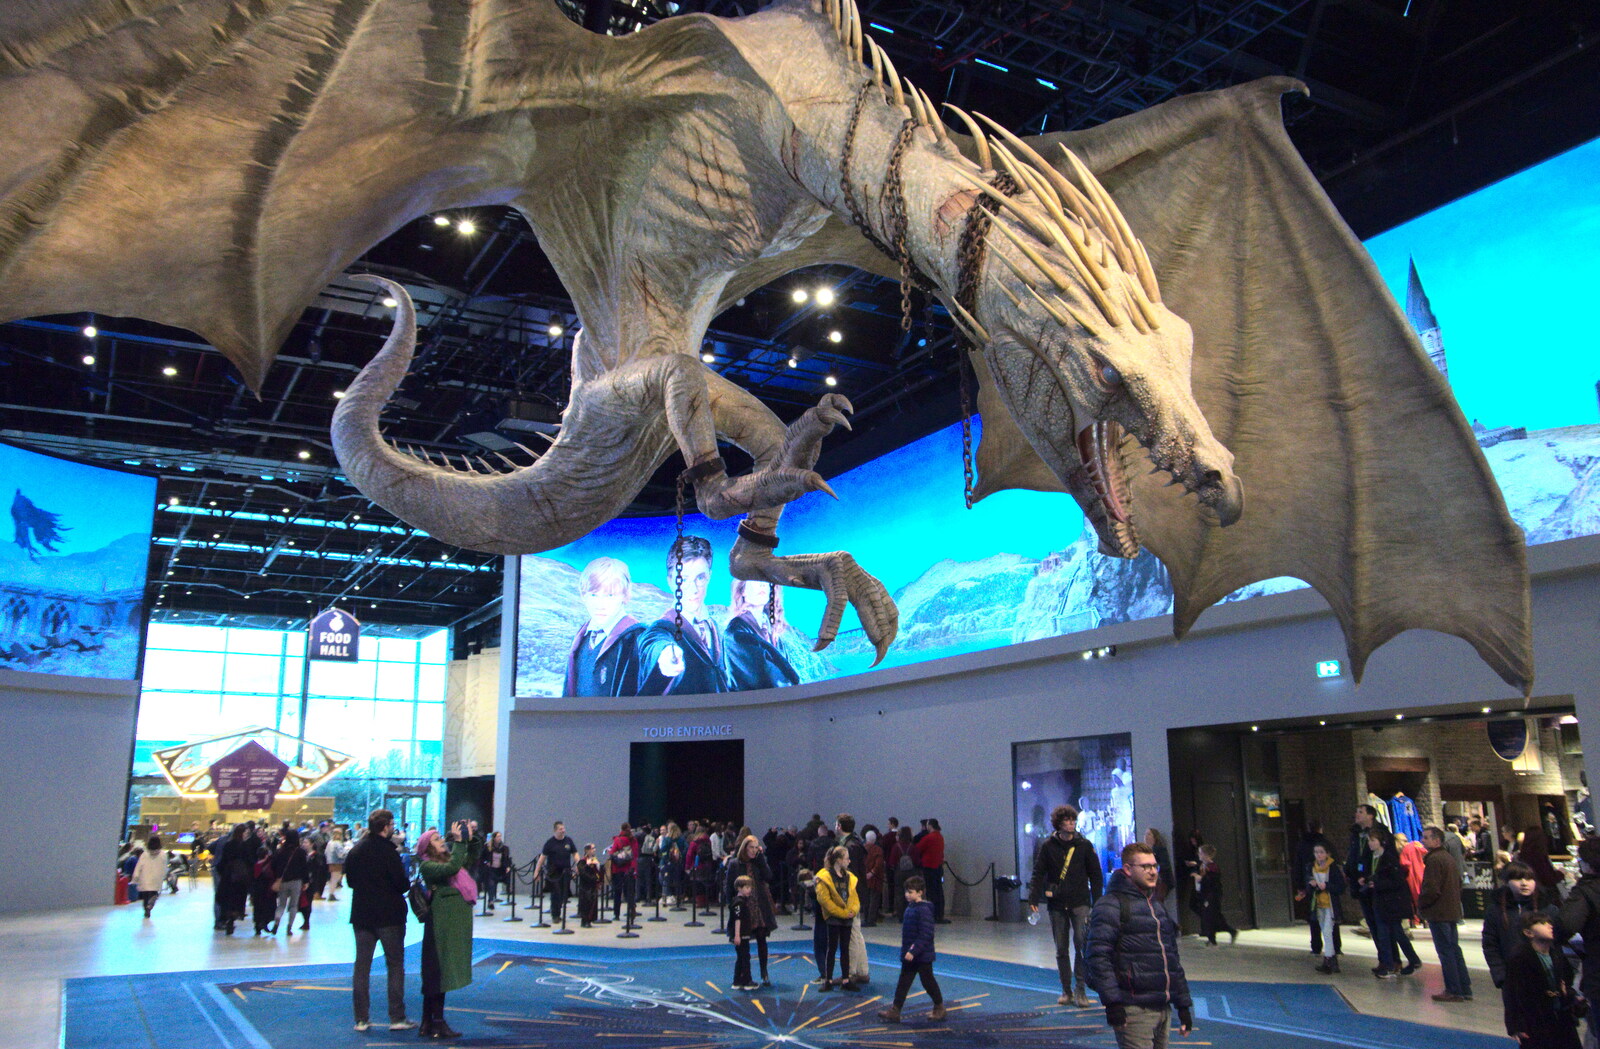 A massive dragon hangs in the entrance from A Trip to Harry Potter World, Leavesden, Hertfordshire - 16th February 2020